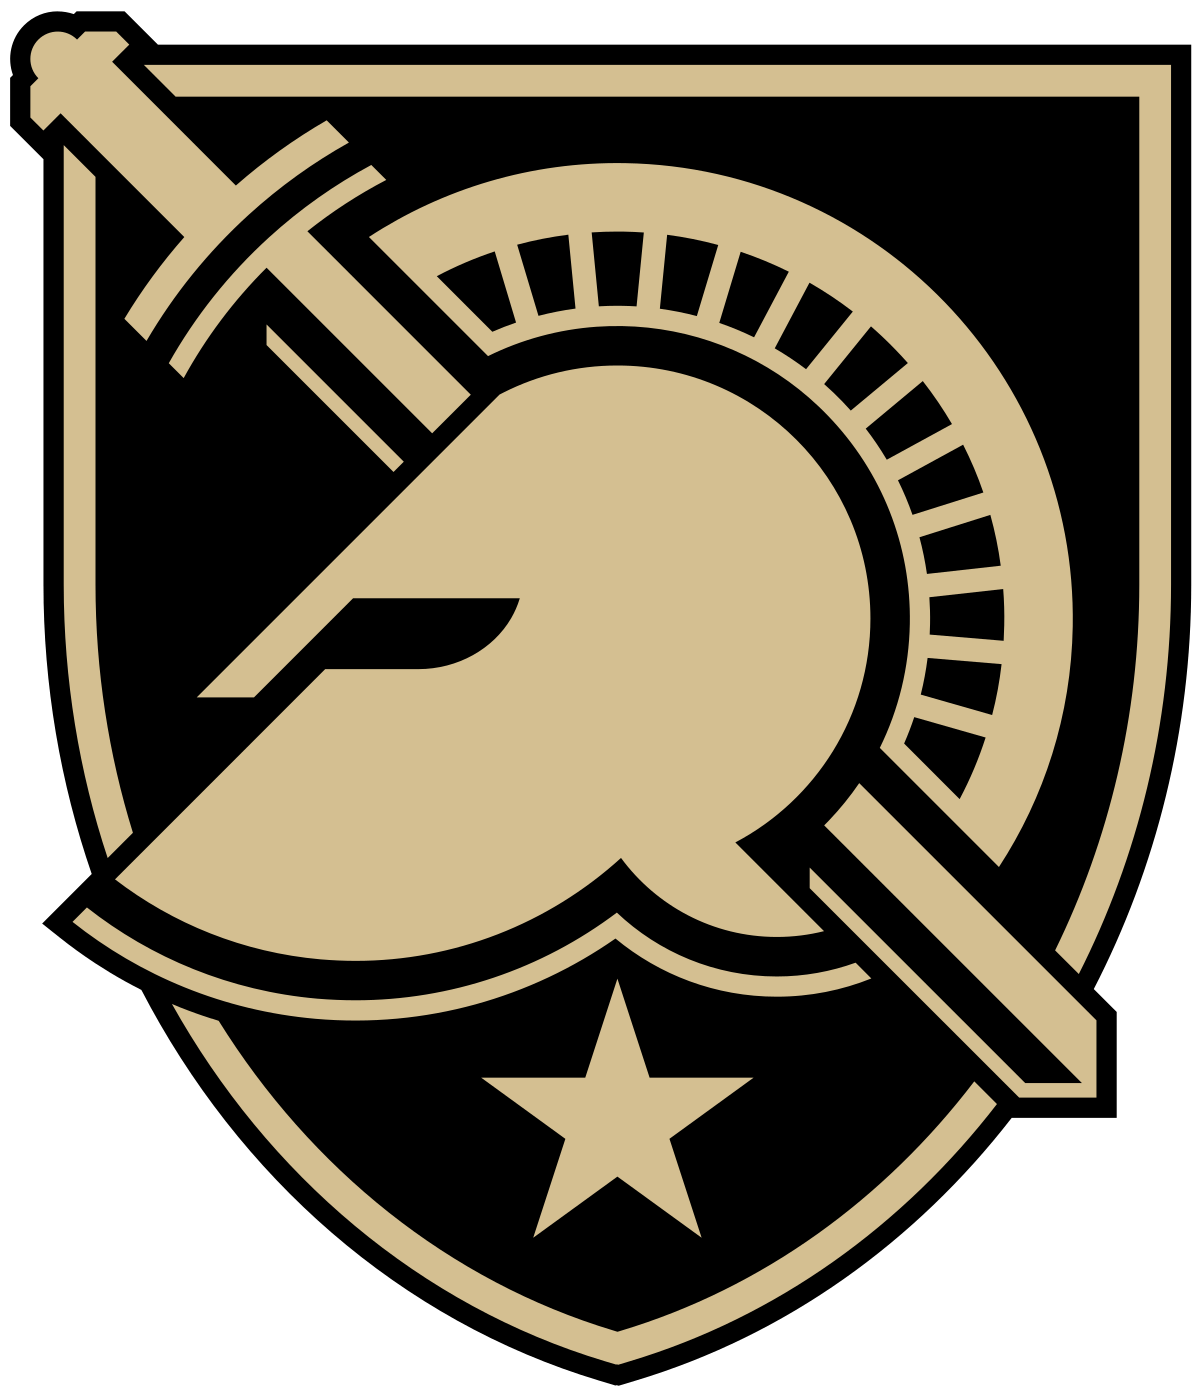 Red and Black Knights Basketball Logo - Army Black Knights